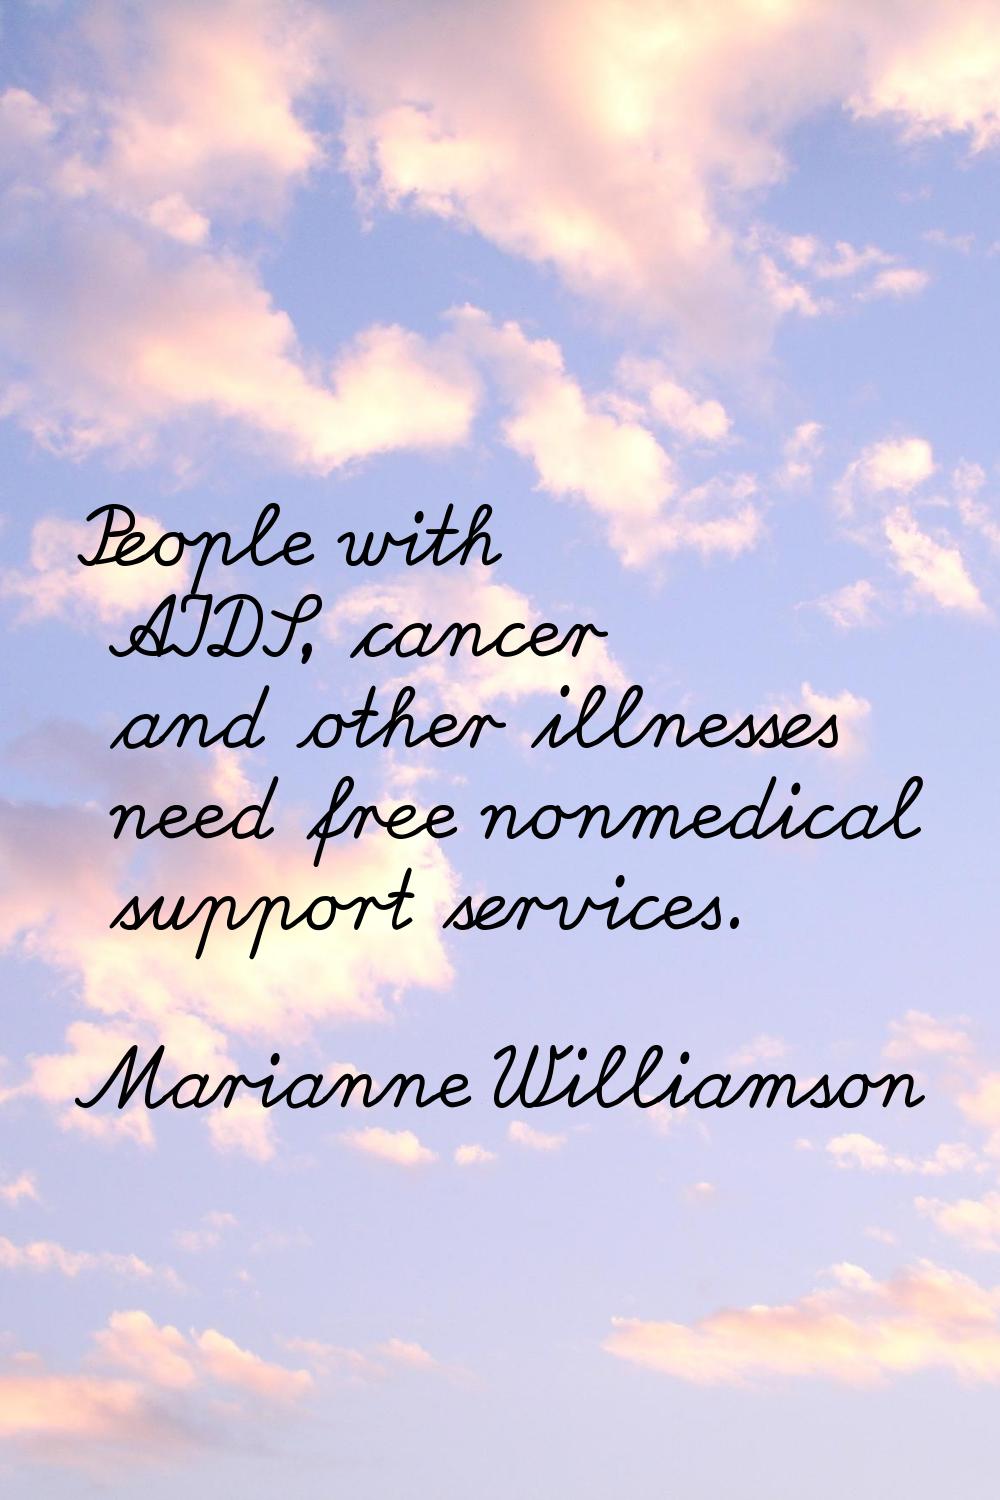 People with AIDS, cancer and other illnesses need free nonmedical support services.